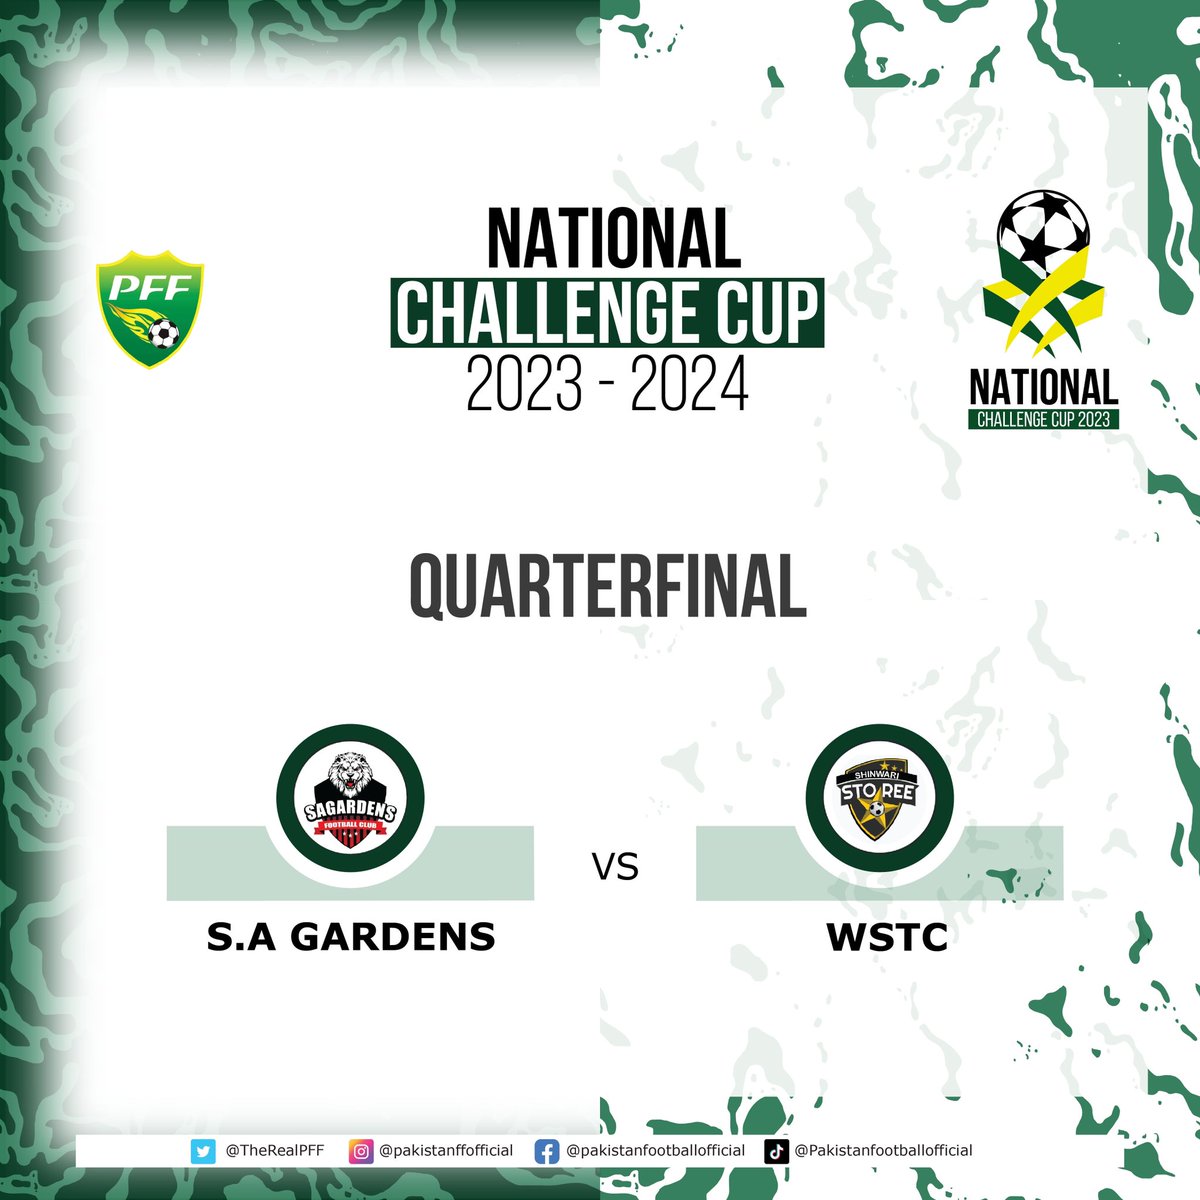 Two thrilling quarter-final clashes today in the National Challenge Cup! Will SA Gardens or WSTC claim the third semi-final spot? And can Pakistan Wapda or Pakistan Air Force secure their ticket to the next round? 📈 #pakistanfootball #dilsayfootball #nationalchallengecup